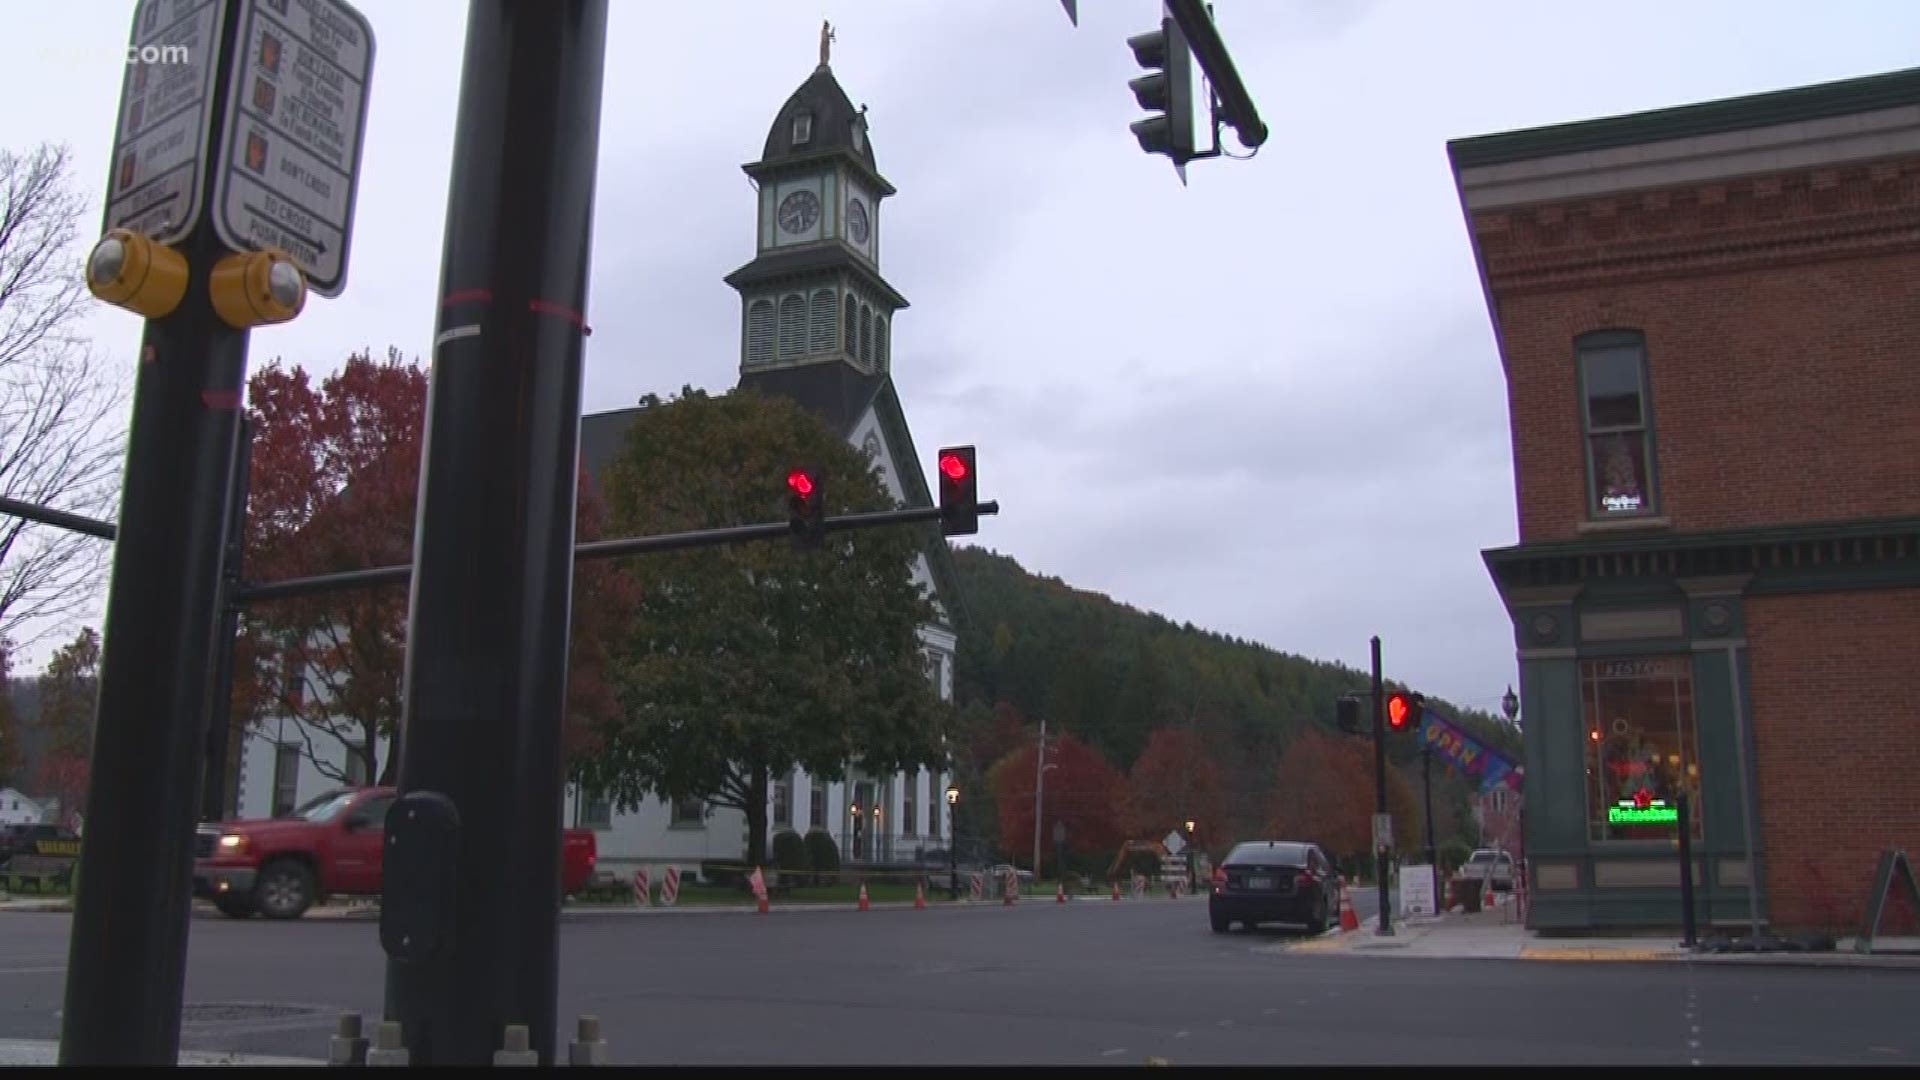 After Adelphia, The Rebirth Of Coudersport